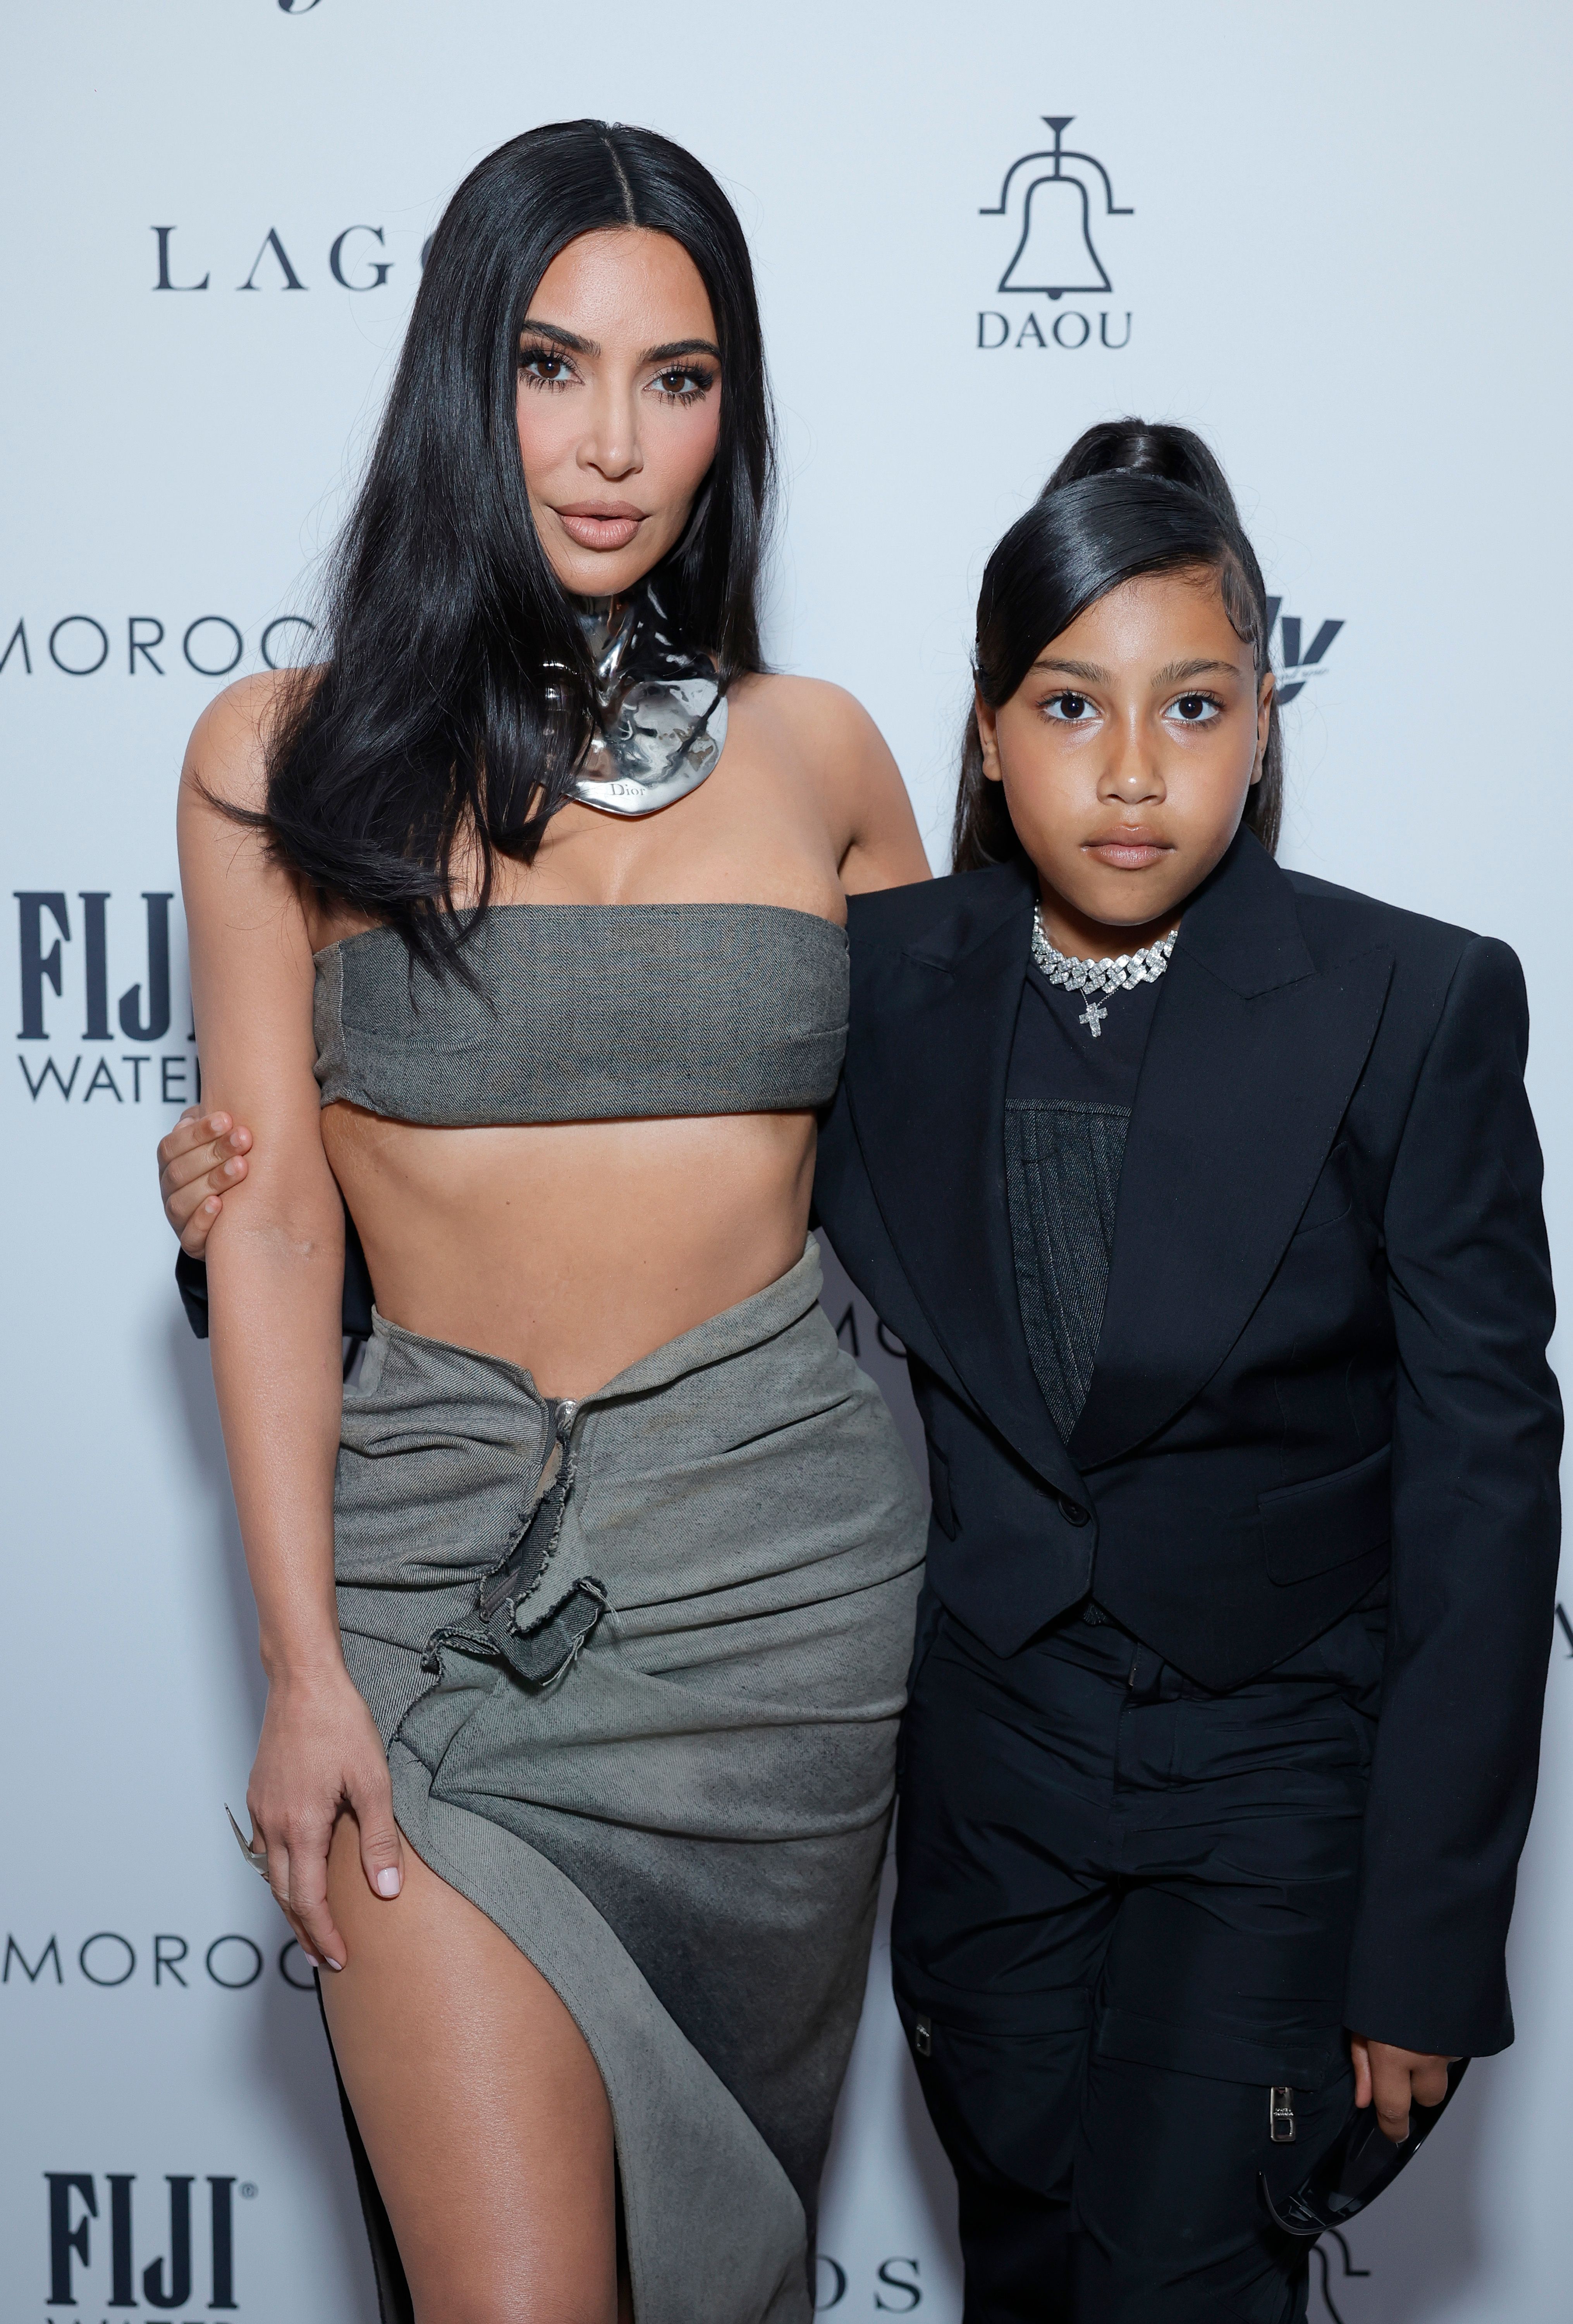 Fans argued Kim should let North 'be a kid' before putting her in the limelight